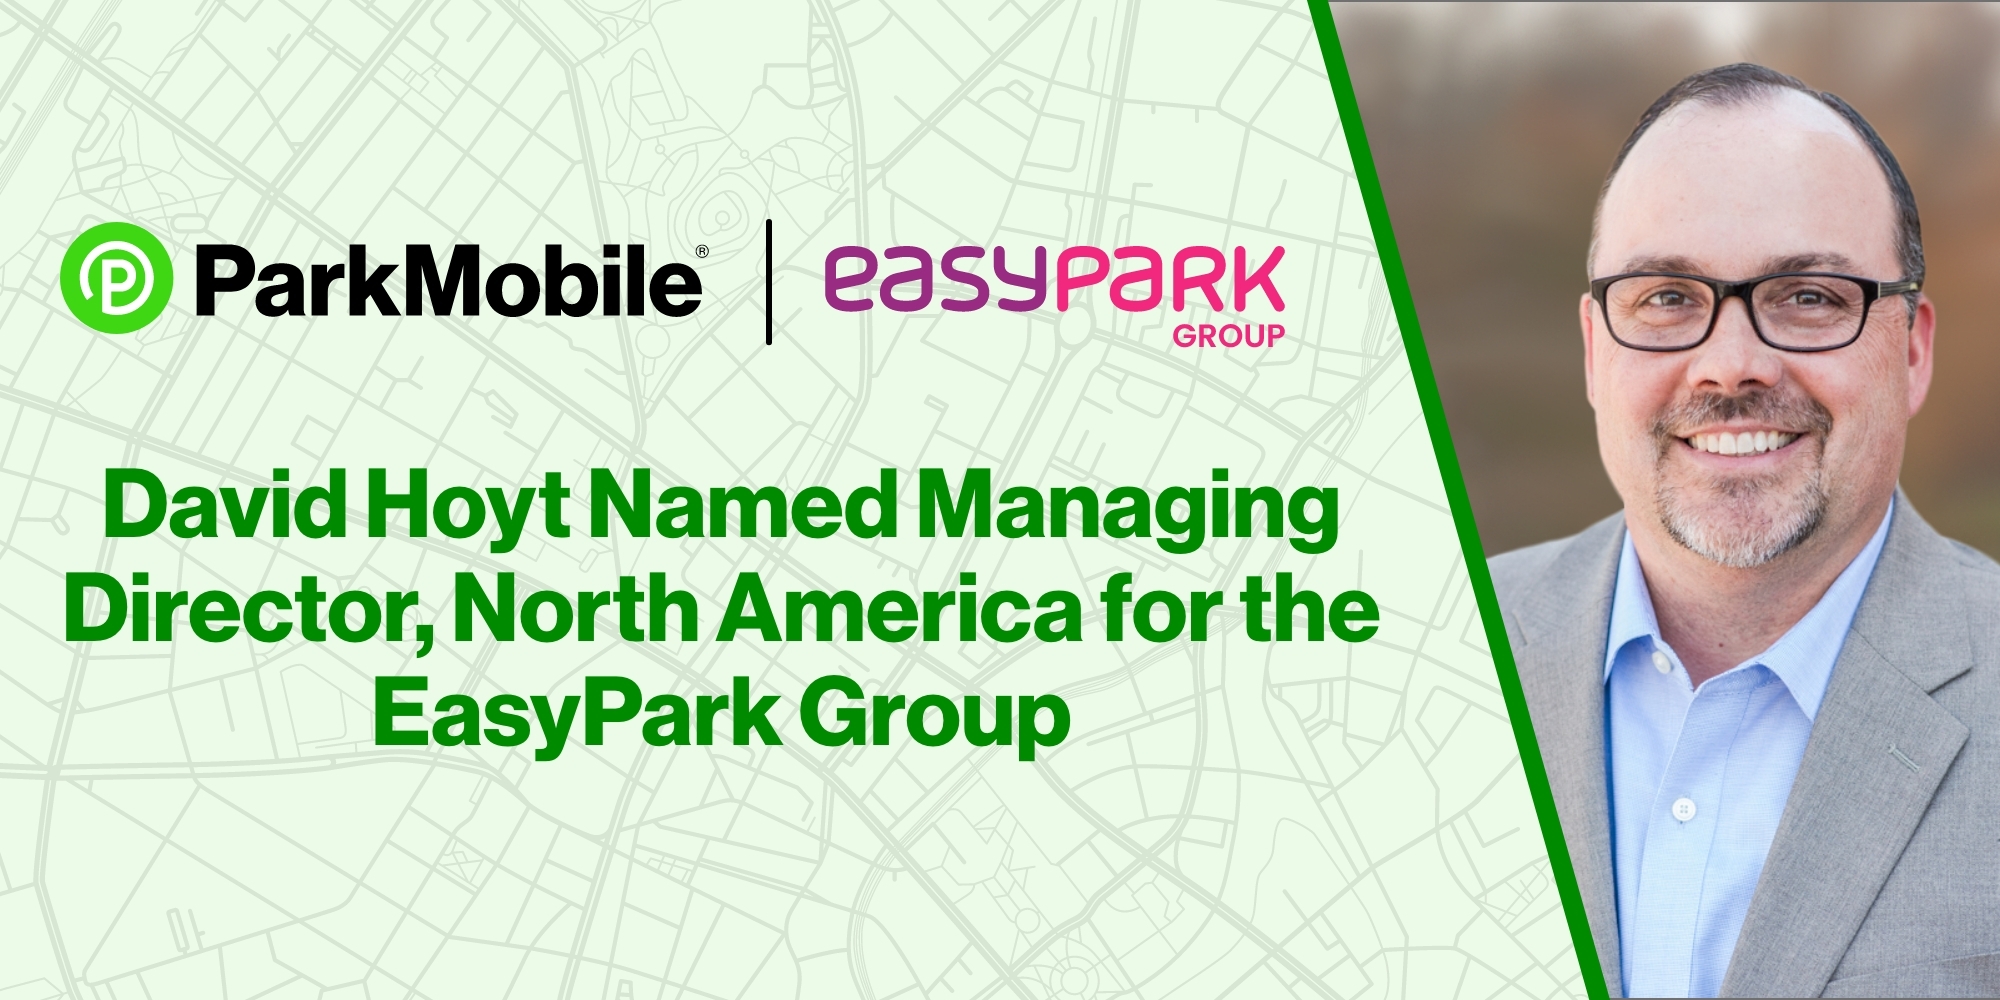 ParkMobile’s Chief Revenue Officer, David Hoyt, Named Managing Director, North America for the EasyPark Group